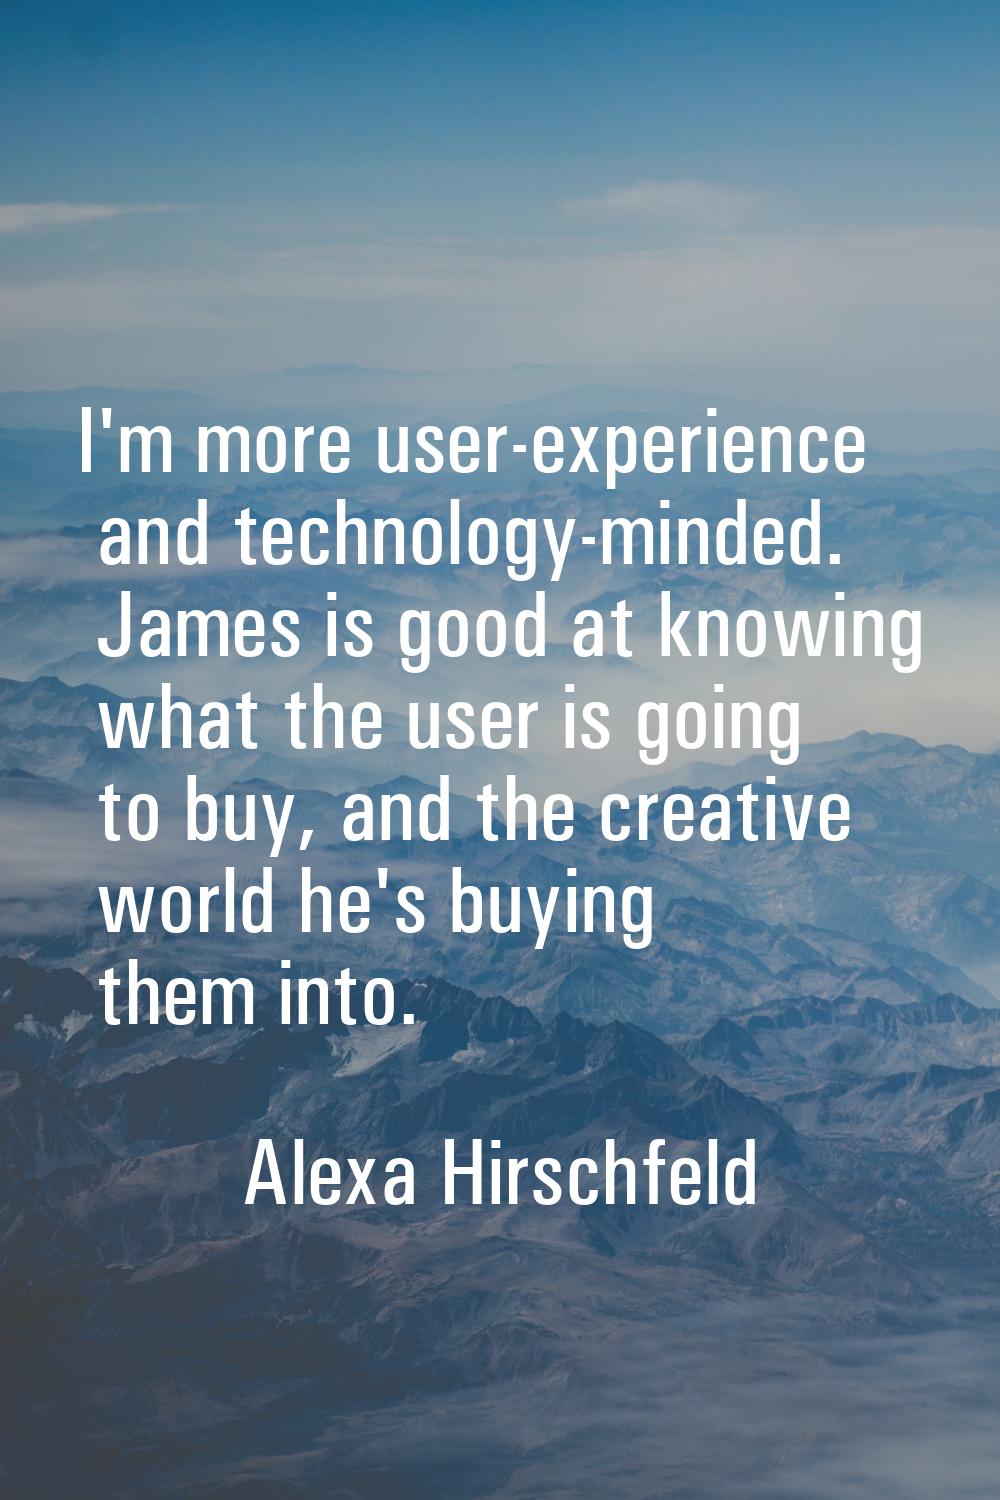 I'm more user-experience and technology-minded. James is good at knowing what the user is going to 